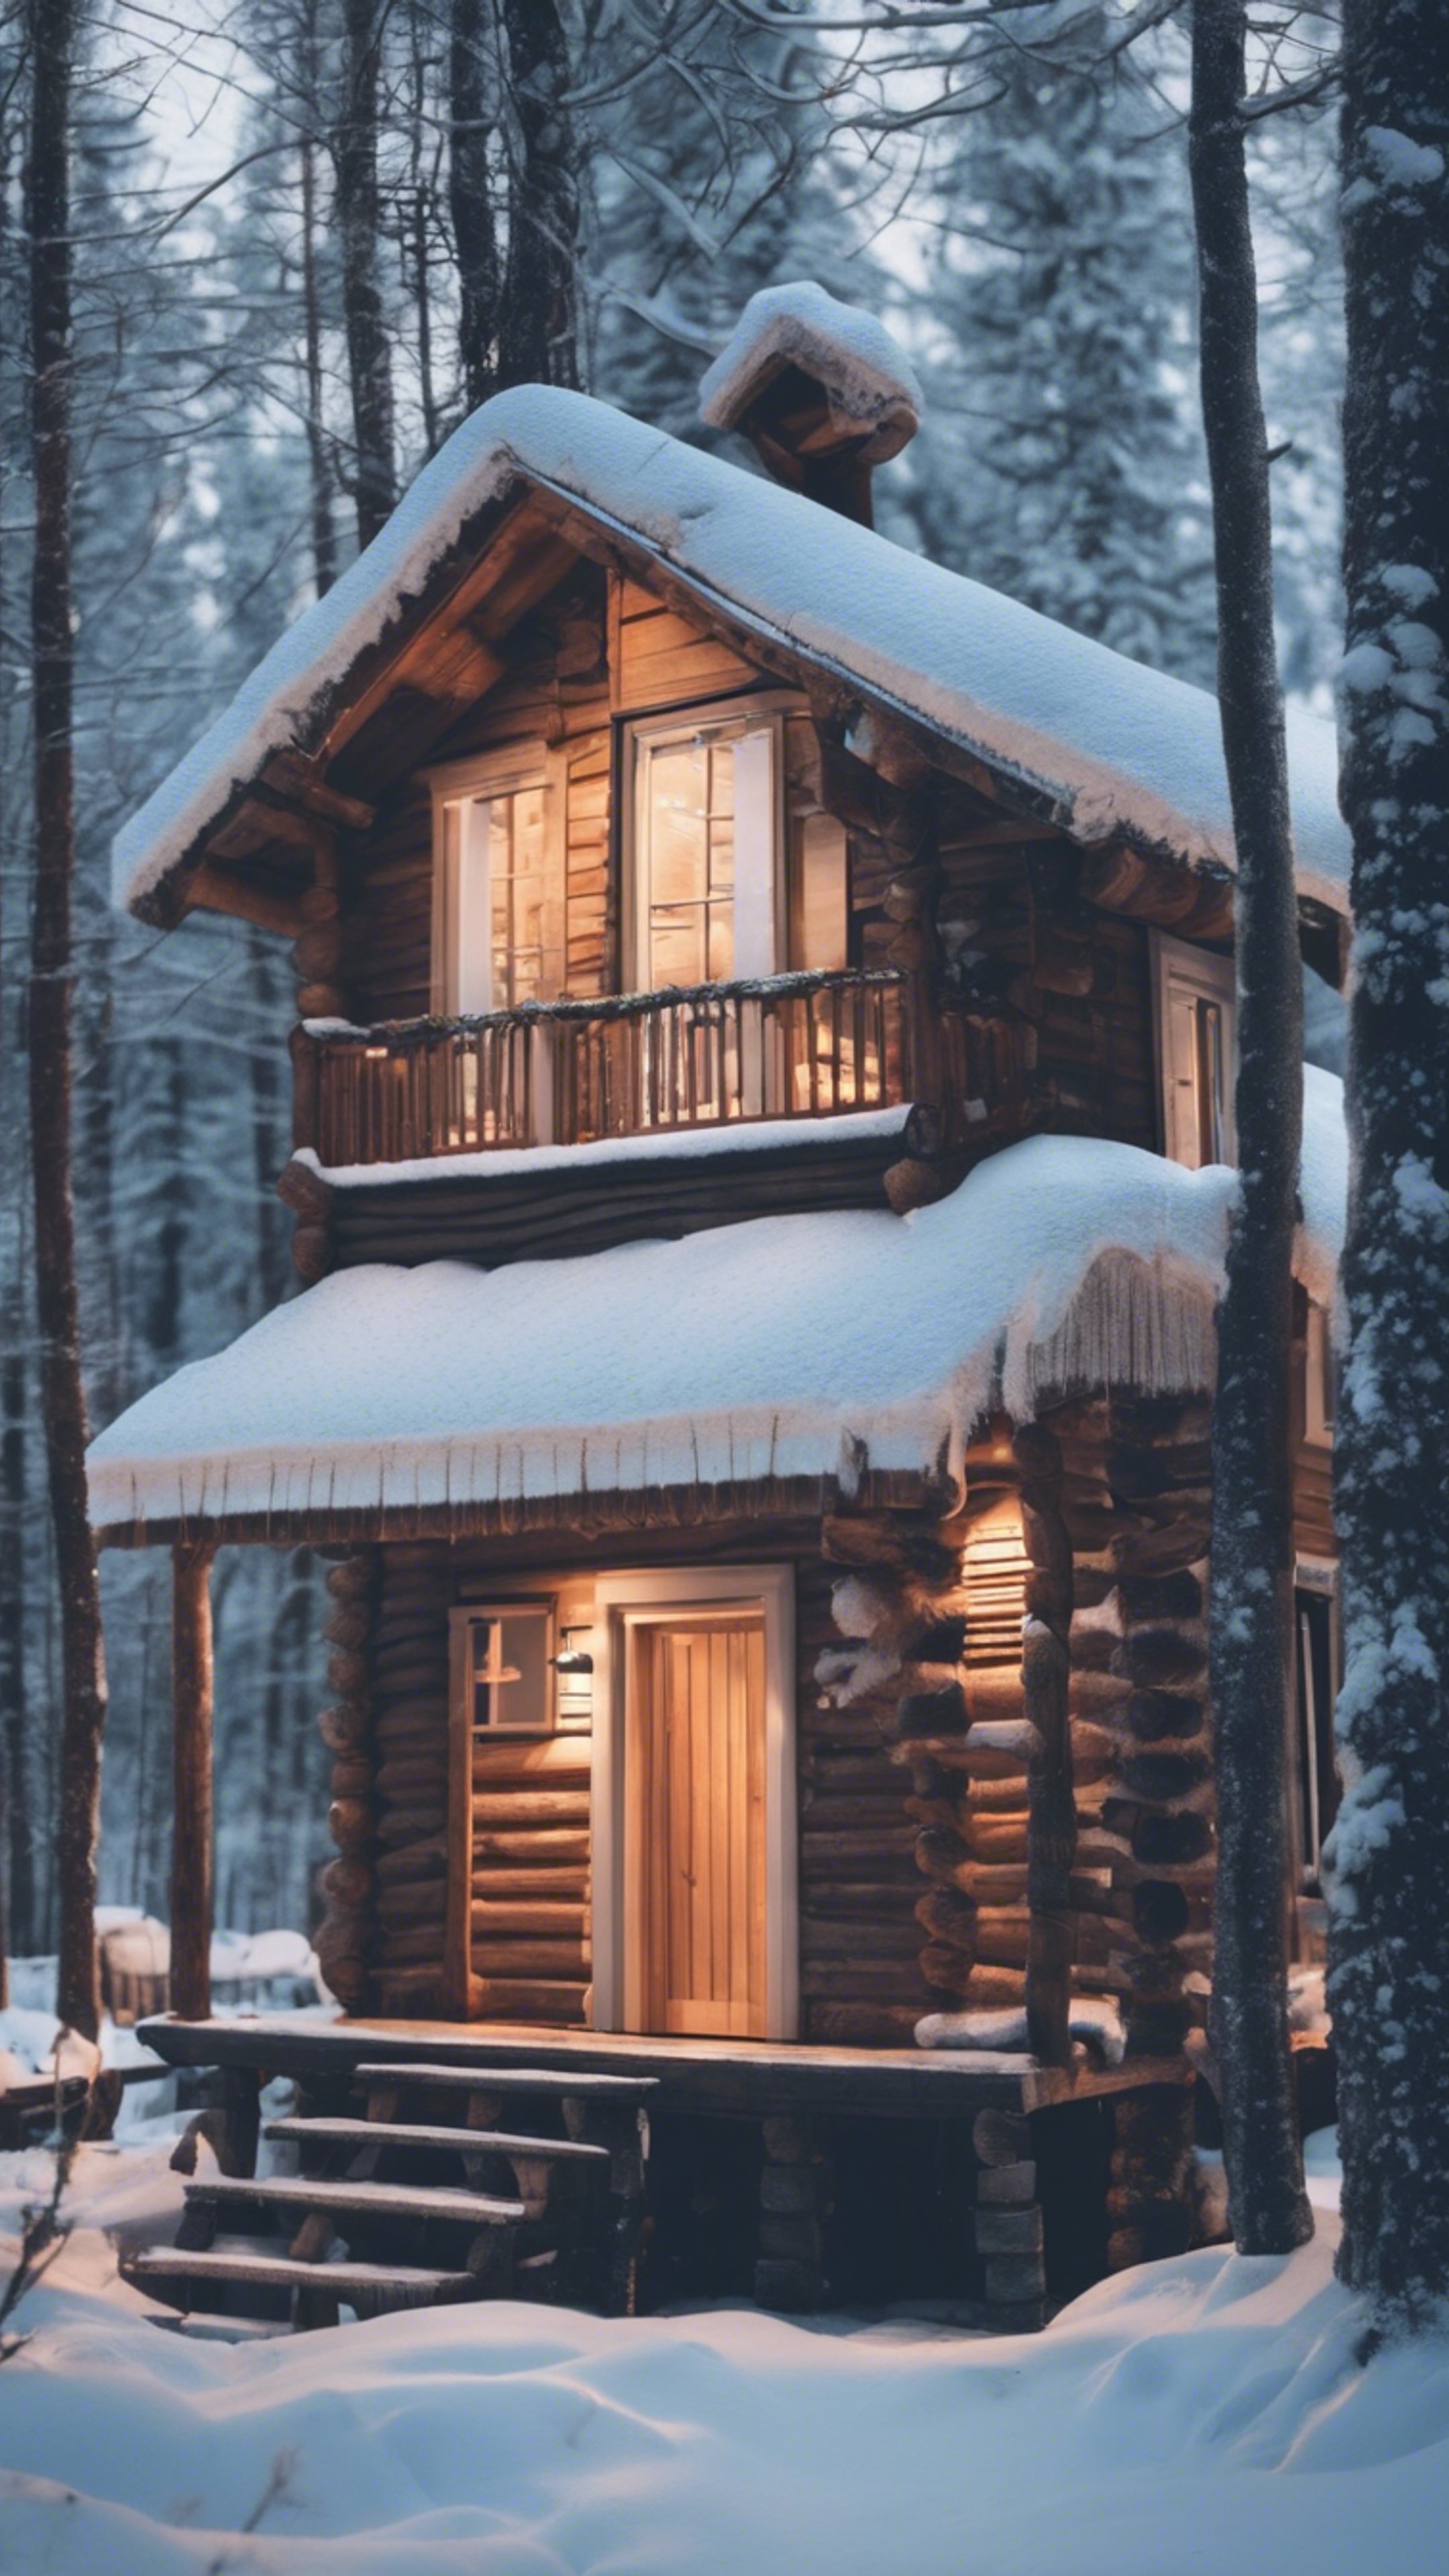 A cozy wooden cabin in the depths of a snowy, white winter forest at dusk Wallpaper[0d1f0ed31e9047d09785]